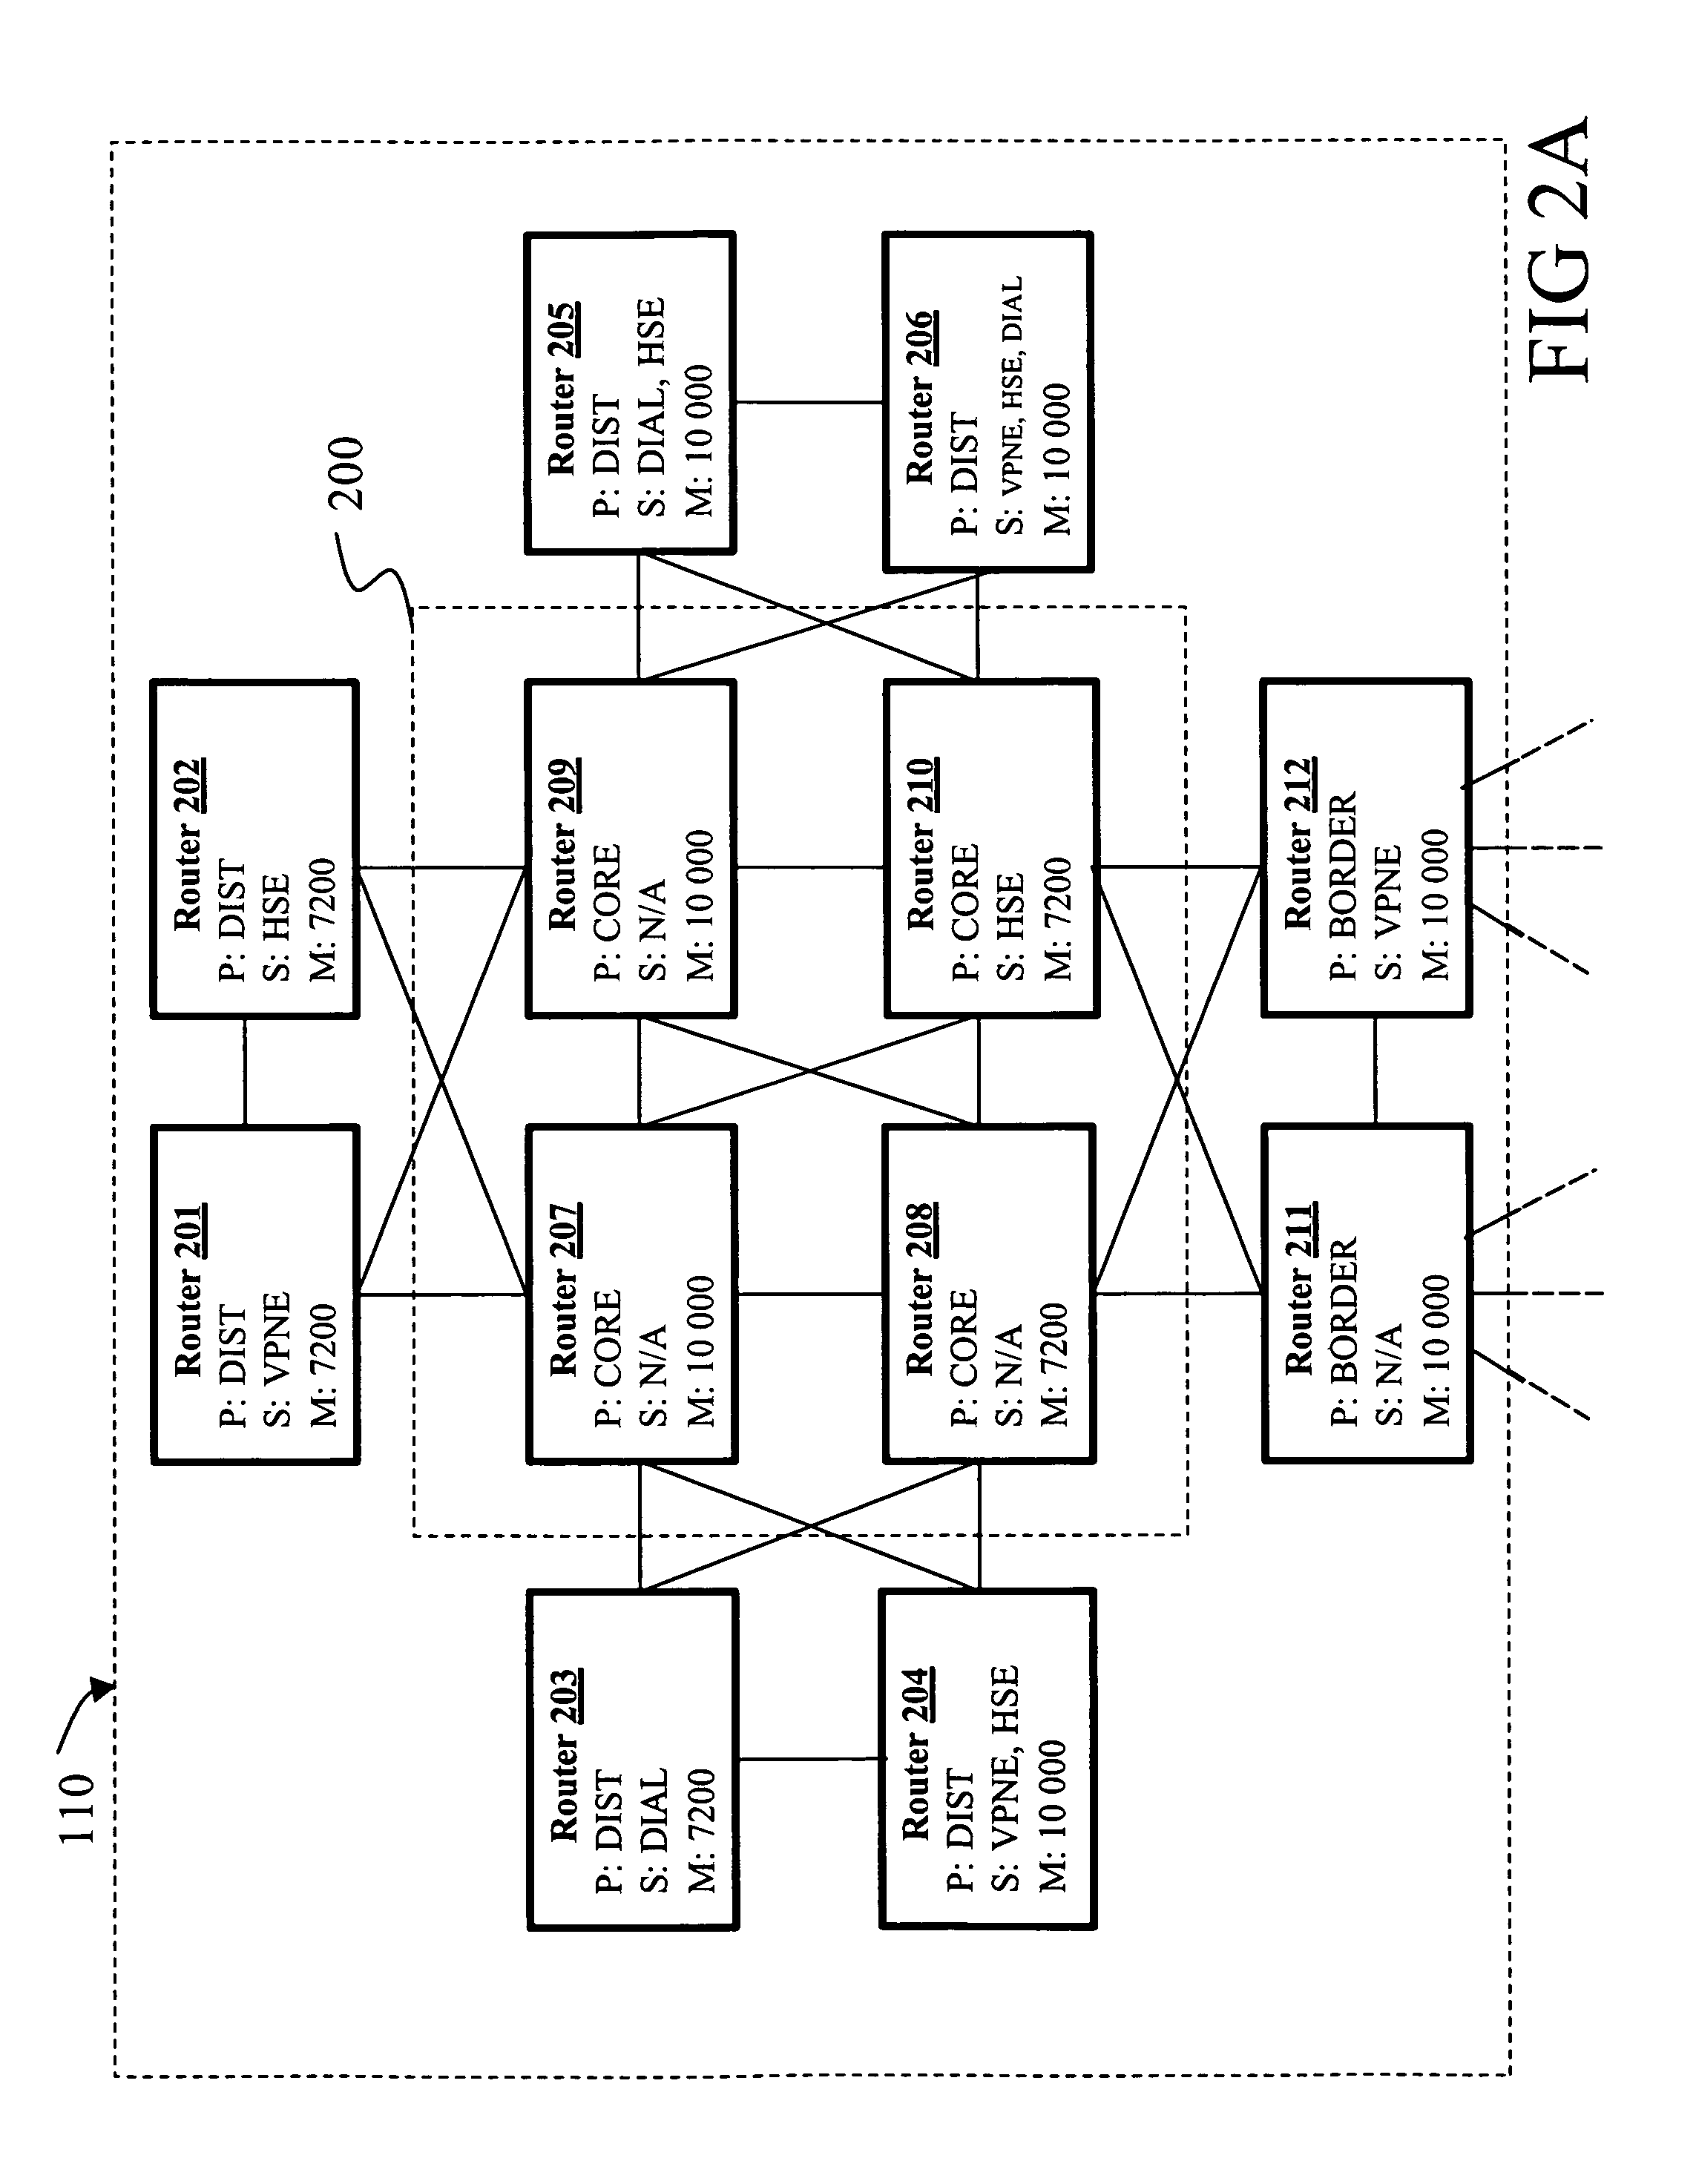 Method and apparatus for network configuration validation